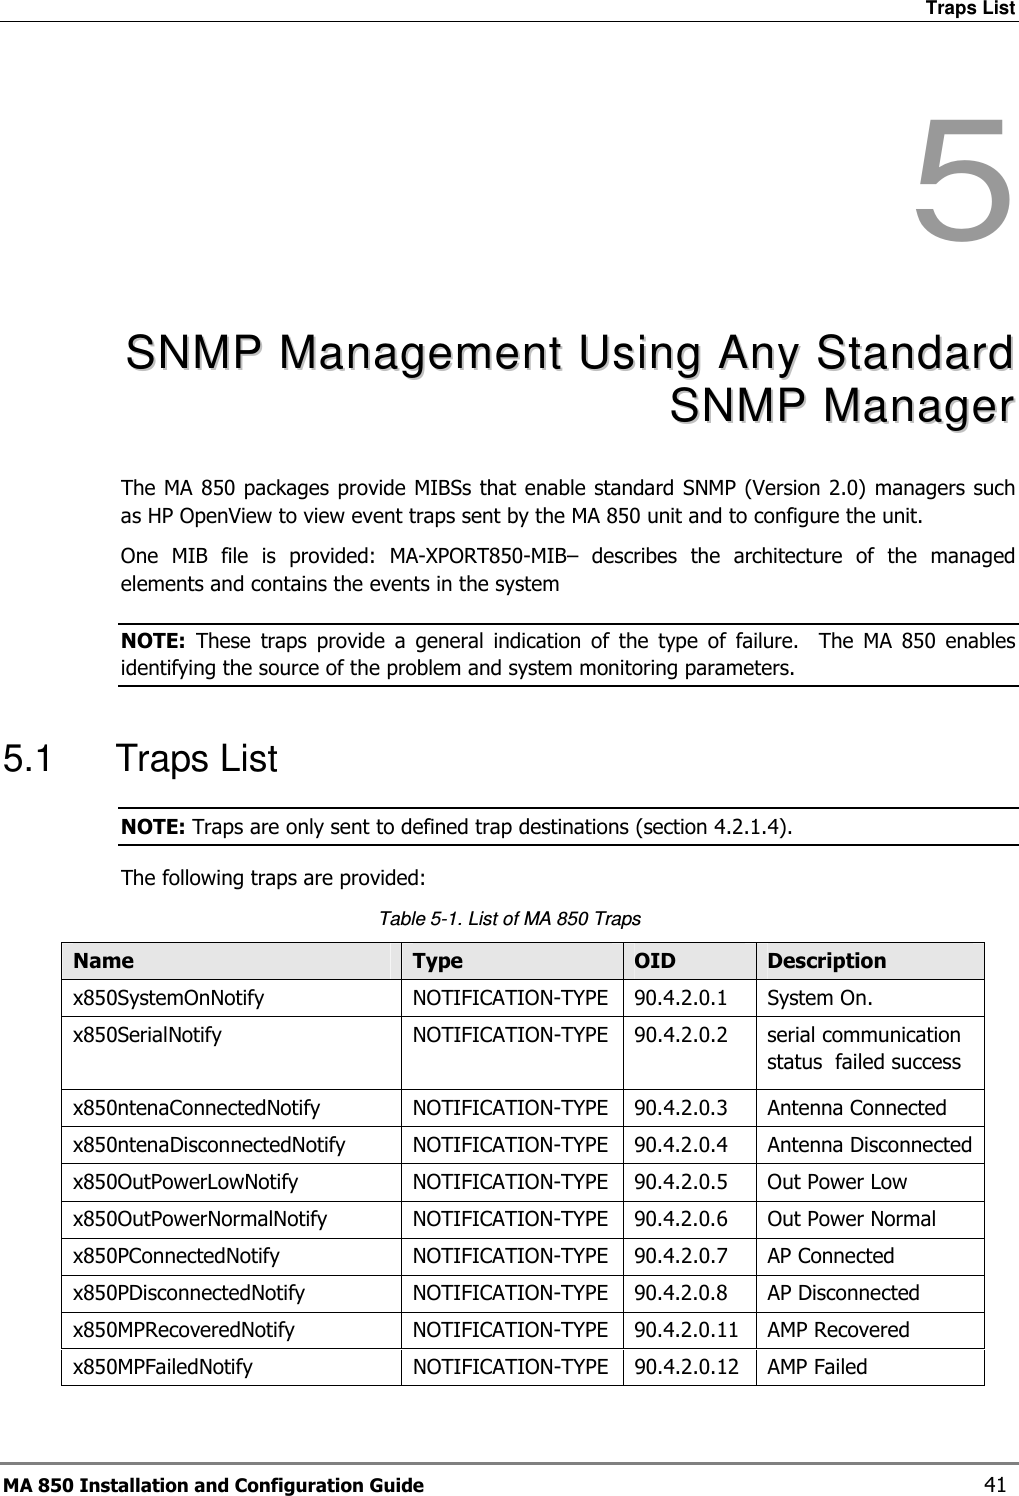 Traps List MA 850 Installation and Configuration Guide    41 5   SSNNMMPP  MMaannaaggeemmeenntt  UUssiinngg  AAnnyy  SSttaannddaarrdd  SSNNMMPP  MMaannaaggeerr    The MA 850 packages provide MIBSs that enable standard SNMP (Version 2.0) managers such as HP OpenView to view event traps sent by the MA 850 unit and to configure the unit.   One  MIB  file  is  provided:  MA-XPORT850-MIB–  describes  the  architecture  of  the  managed elements and contains the events in the system  NOTE:  These  traps  provide  a  general  indication  of  the  type  of  failure.    The  MA  850  enables identifying the source of the problem and system monitoring parameters. 5.1  Traps List NOTE: Traps are only sent to defined trap destinations (section  4.2.1.4). The following traps are provided: Table  5-1. List of MA 850 Traps Name     Type  OID  Description x850SystemOnNotify  NOTIFICATION-TYPE  90.4.2.0.1  System On. x850SerialNotify  NOTIFICATION-TYPE  90.4.2.0.2  serial communication status  failed success x850ntenaConnectedNotify  NOTIFICATION-TYPE  90.4.2.0.3  Antenna Connected x850ntenaDisconnectedNotify  NOTIFICATION-TYPE  90.4.2.0.4  Antenna Disconnected x850OutPowerLowNotify  NOTIFICATION-TYPE  90.4.2.0.5  Out Power Low x850OutPowerNormalNotify  NOTIFICATION-TYPE  90.4.2.0.6  Out Power Normal x850PConnectedNotify  NOTIFICATION-TYPE  90.4.2.0.7  AP Connected x850PDisconnectedNotify  NOTIFICATION-TYPE  90.4.2.0.8  AP Disconnected x850MPRecoveredNotify  NOTIFICATION-TYPE  90.4.2.0.11  AMP Recovered x850MPFailedNotify  NOTIFICATION-TYPE  90.4.2.0.12  AMP Failed    